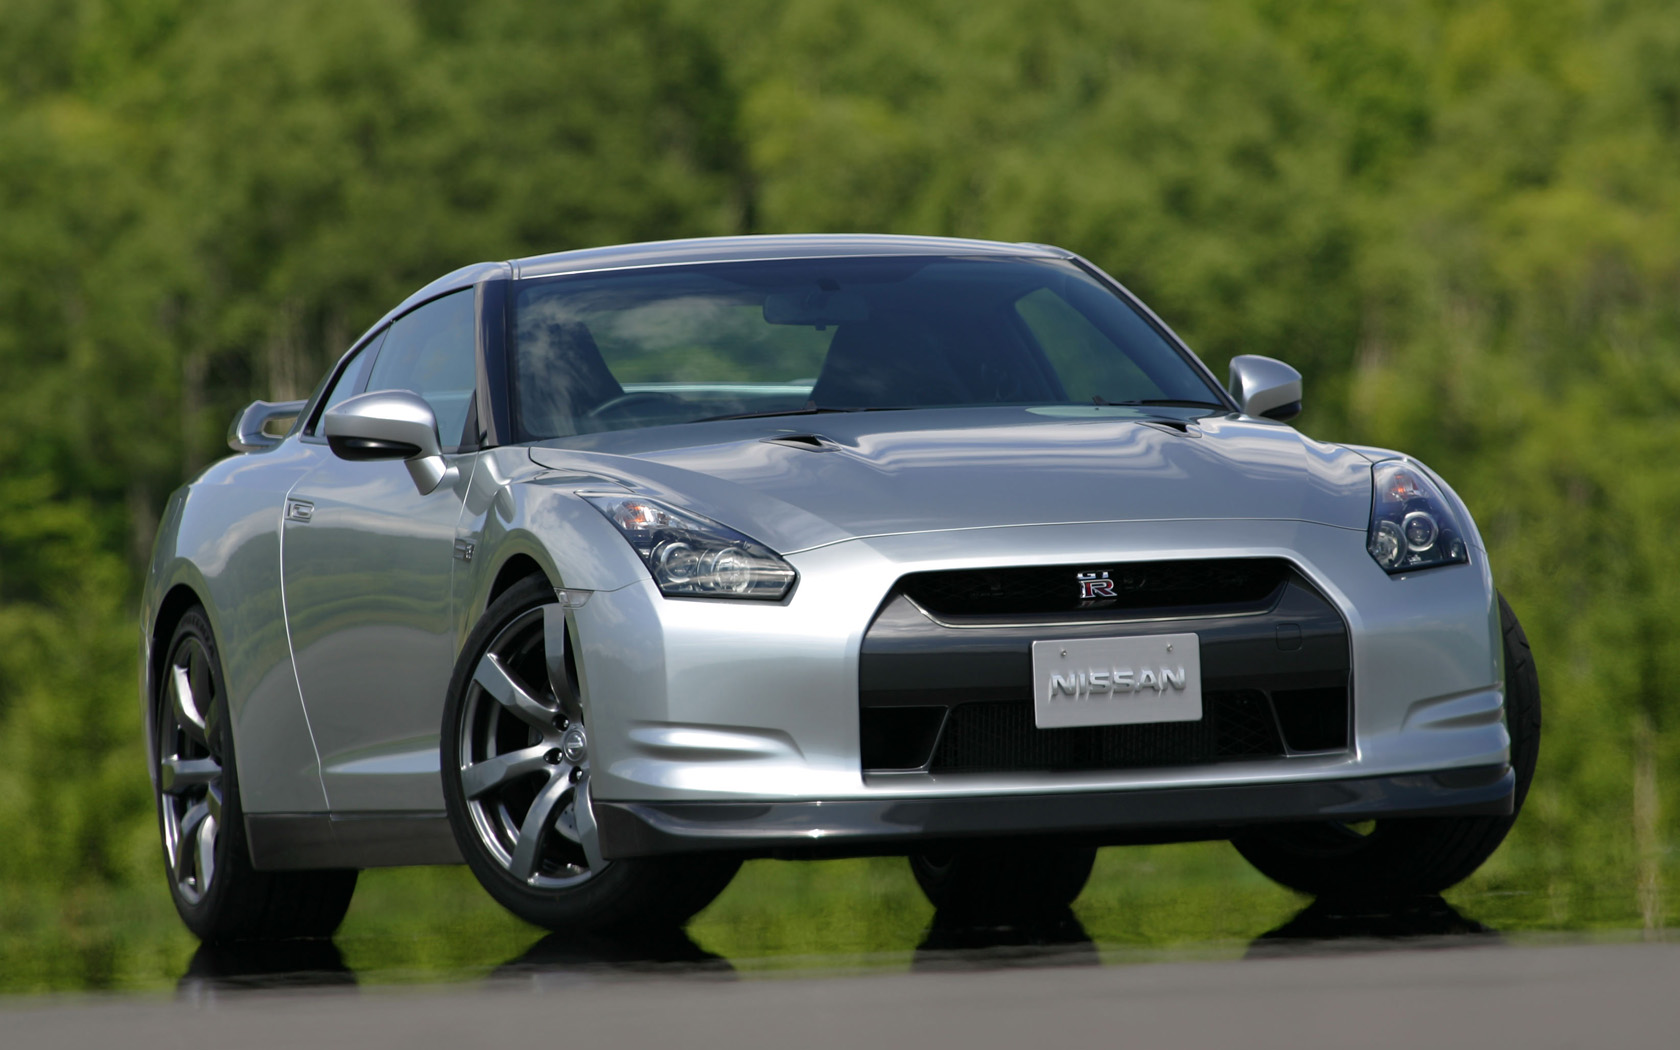 Pic of the 2007 nissan gtr #9